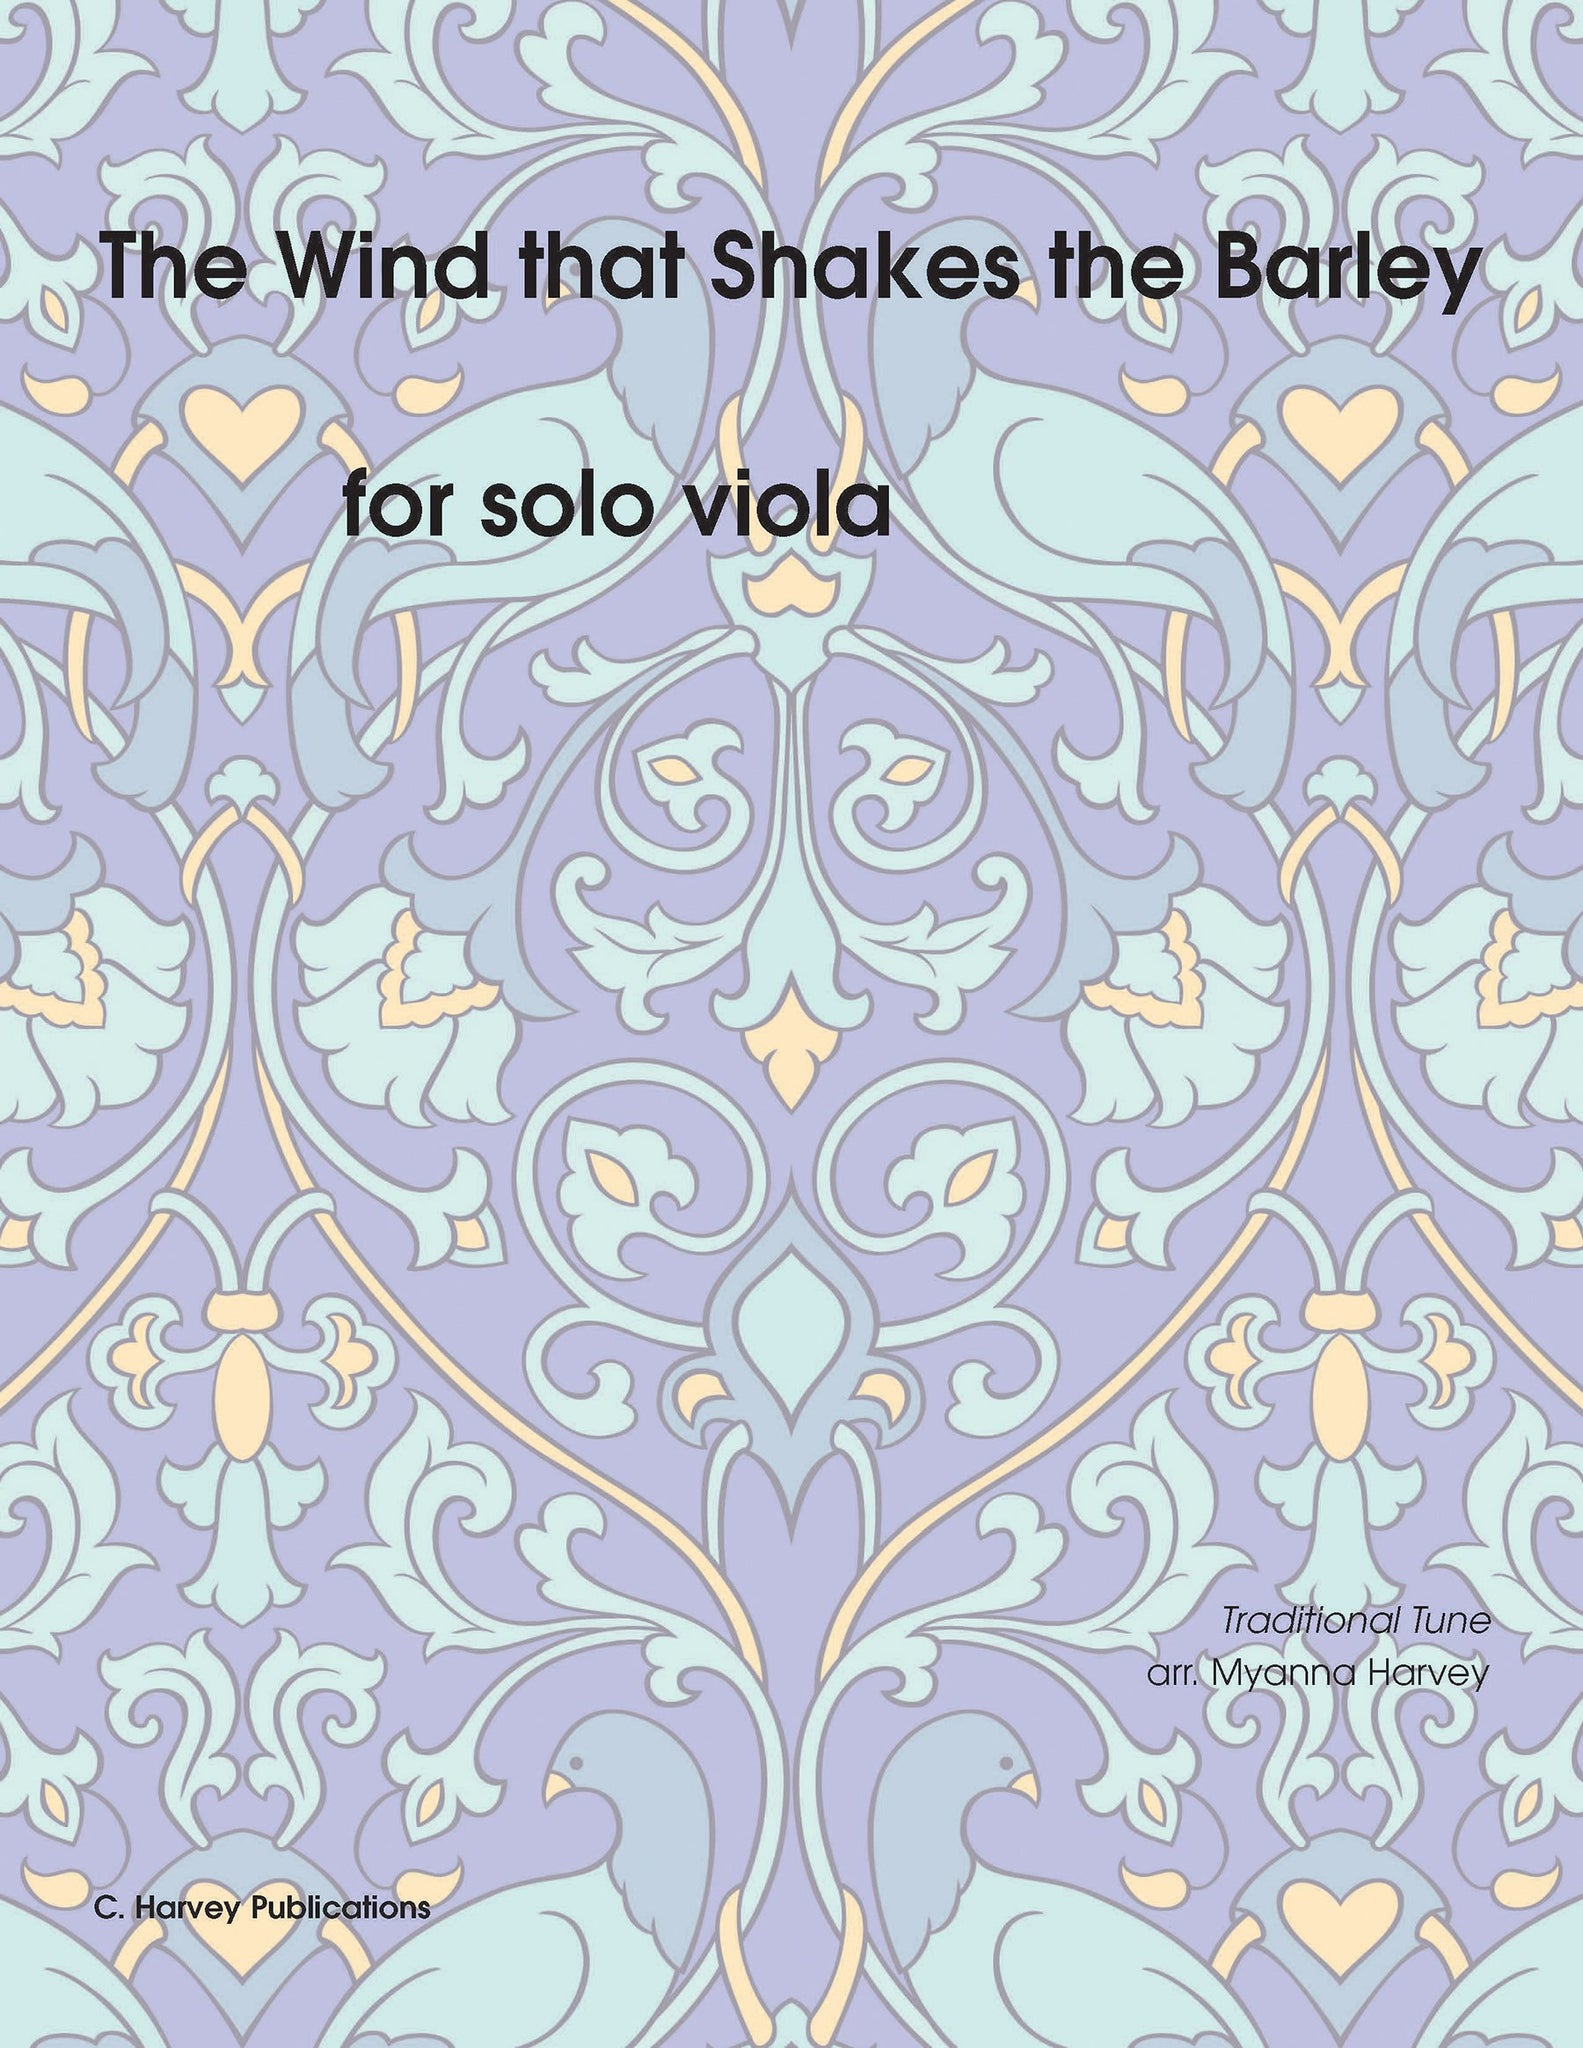 The Wind that Shakes the Barley for Solo Viola - Variations on an Unaccompanied Fiddle Tune - PDF download